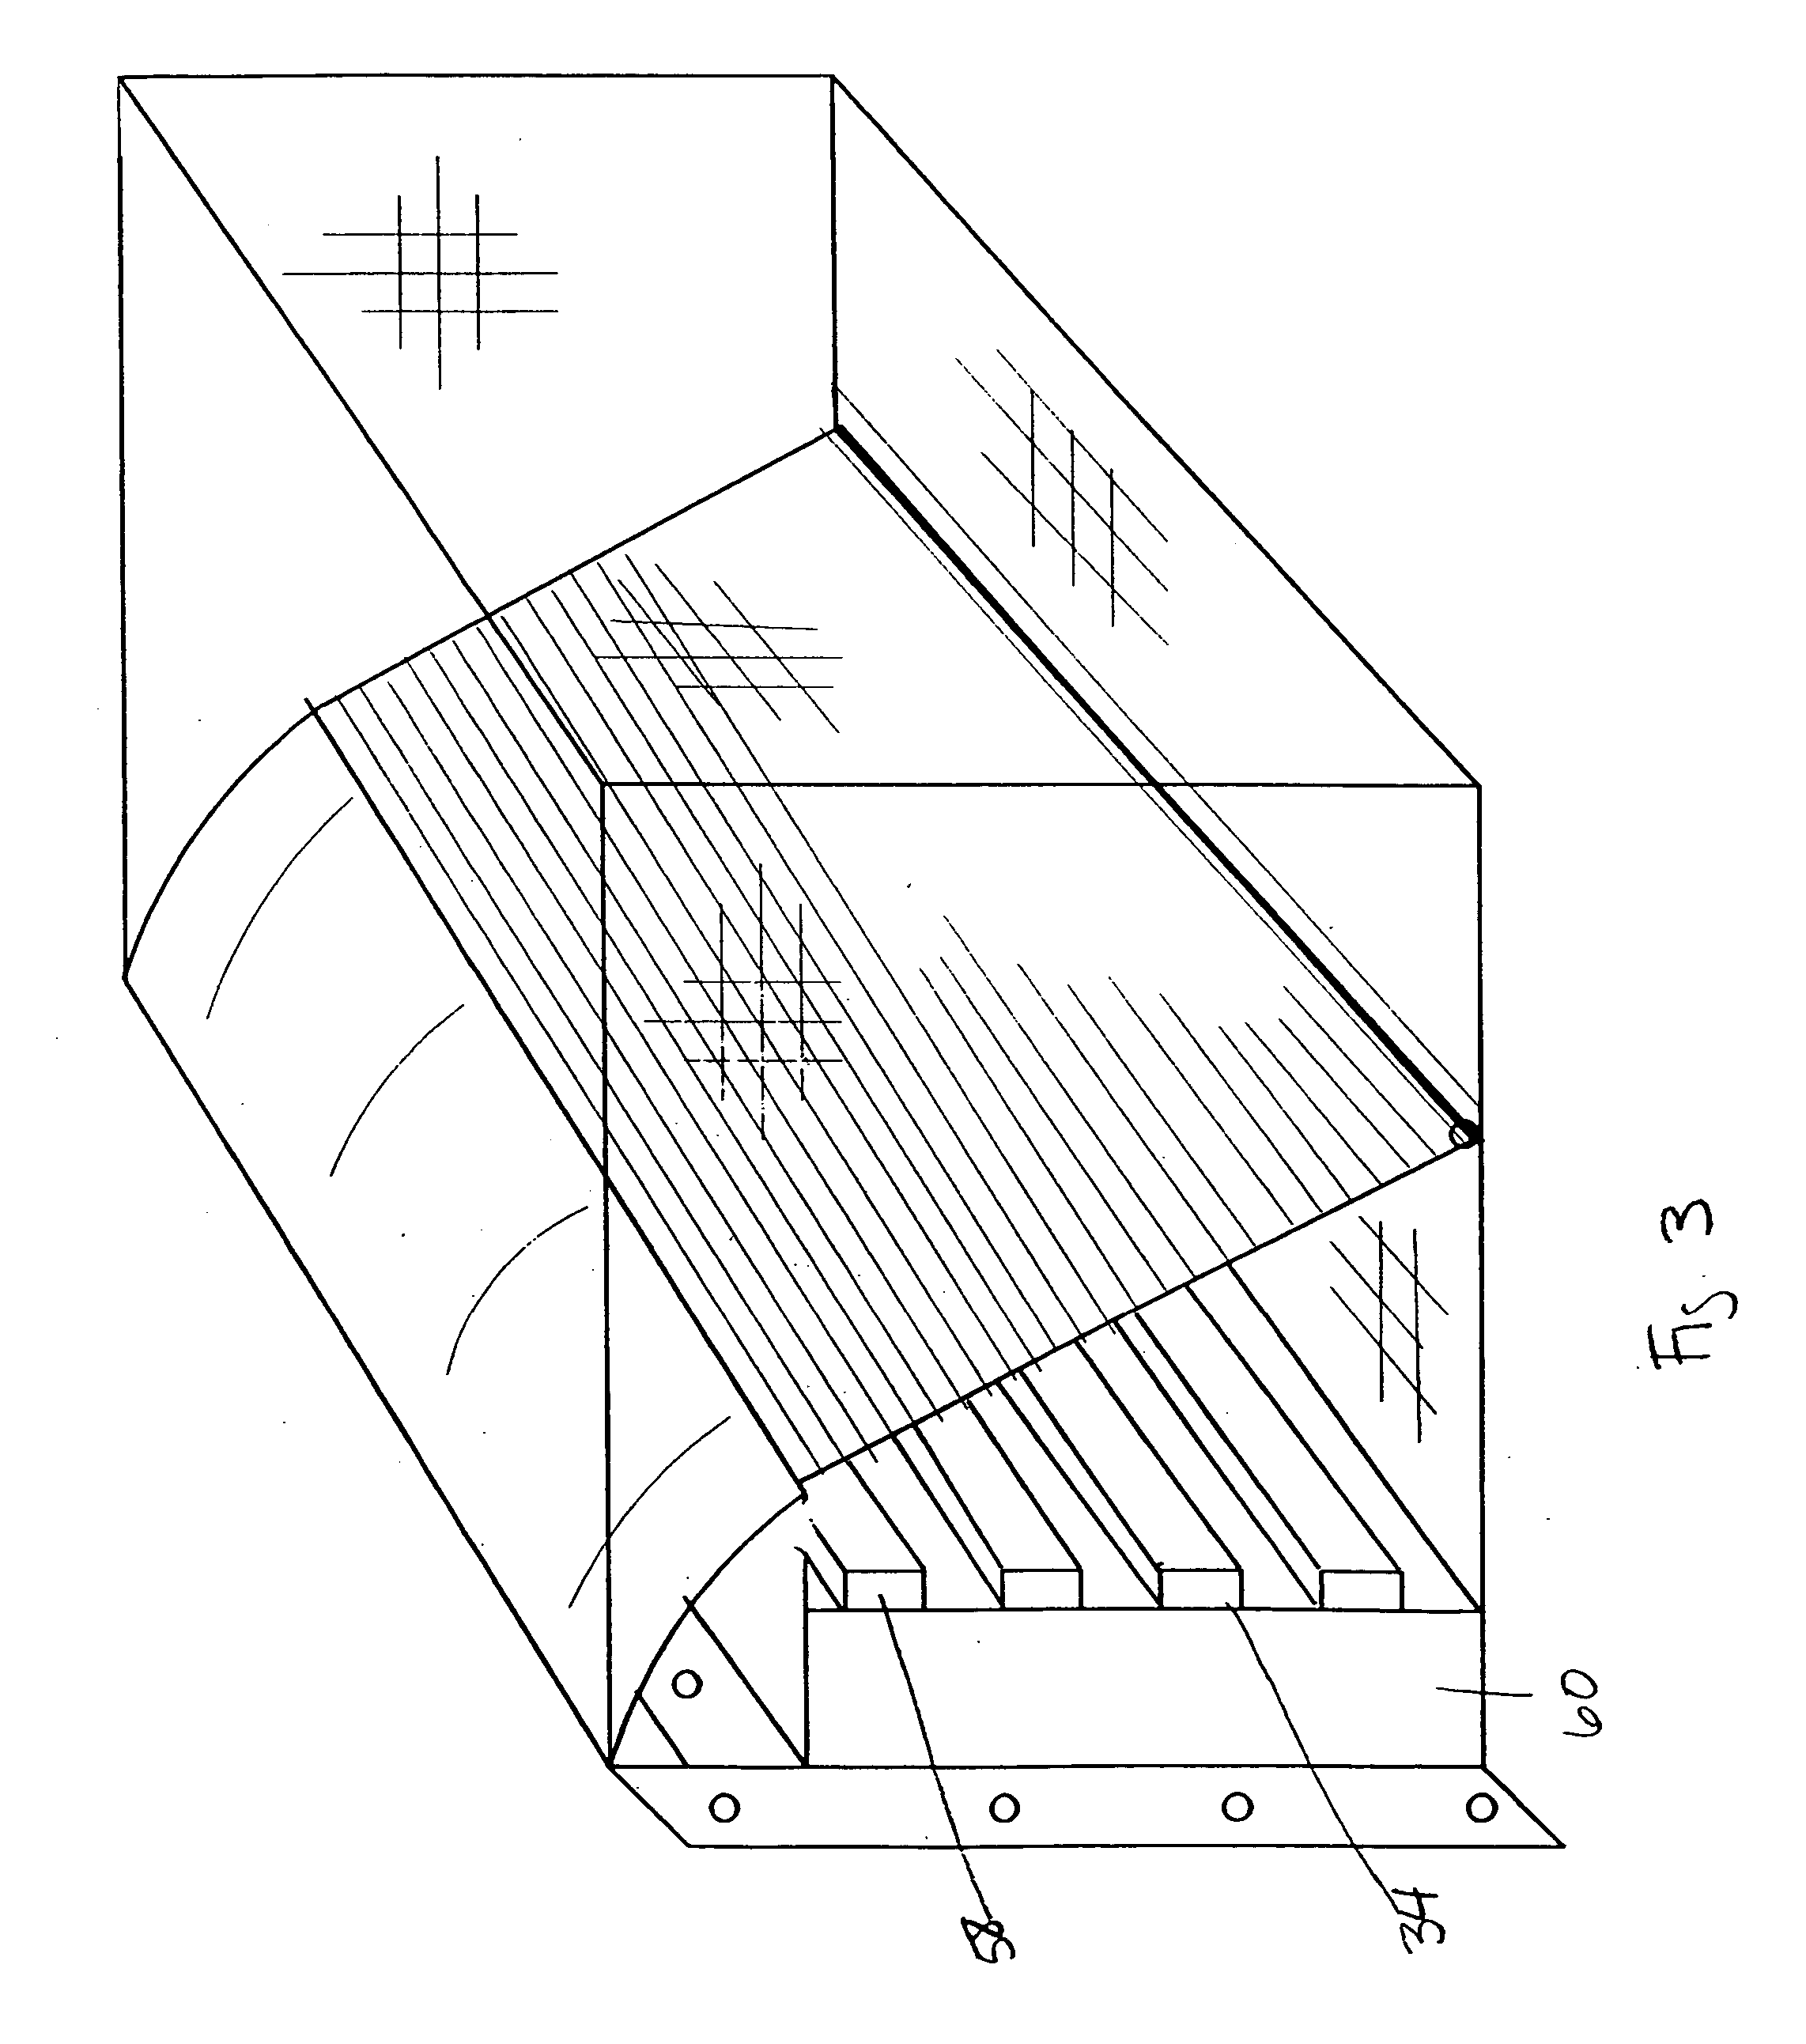 Method and apparatus for separating oil and debris from water run-off